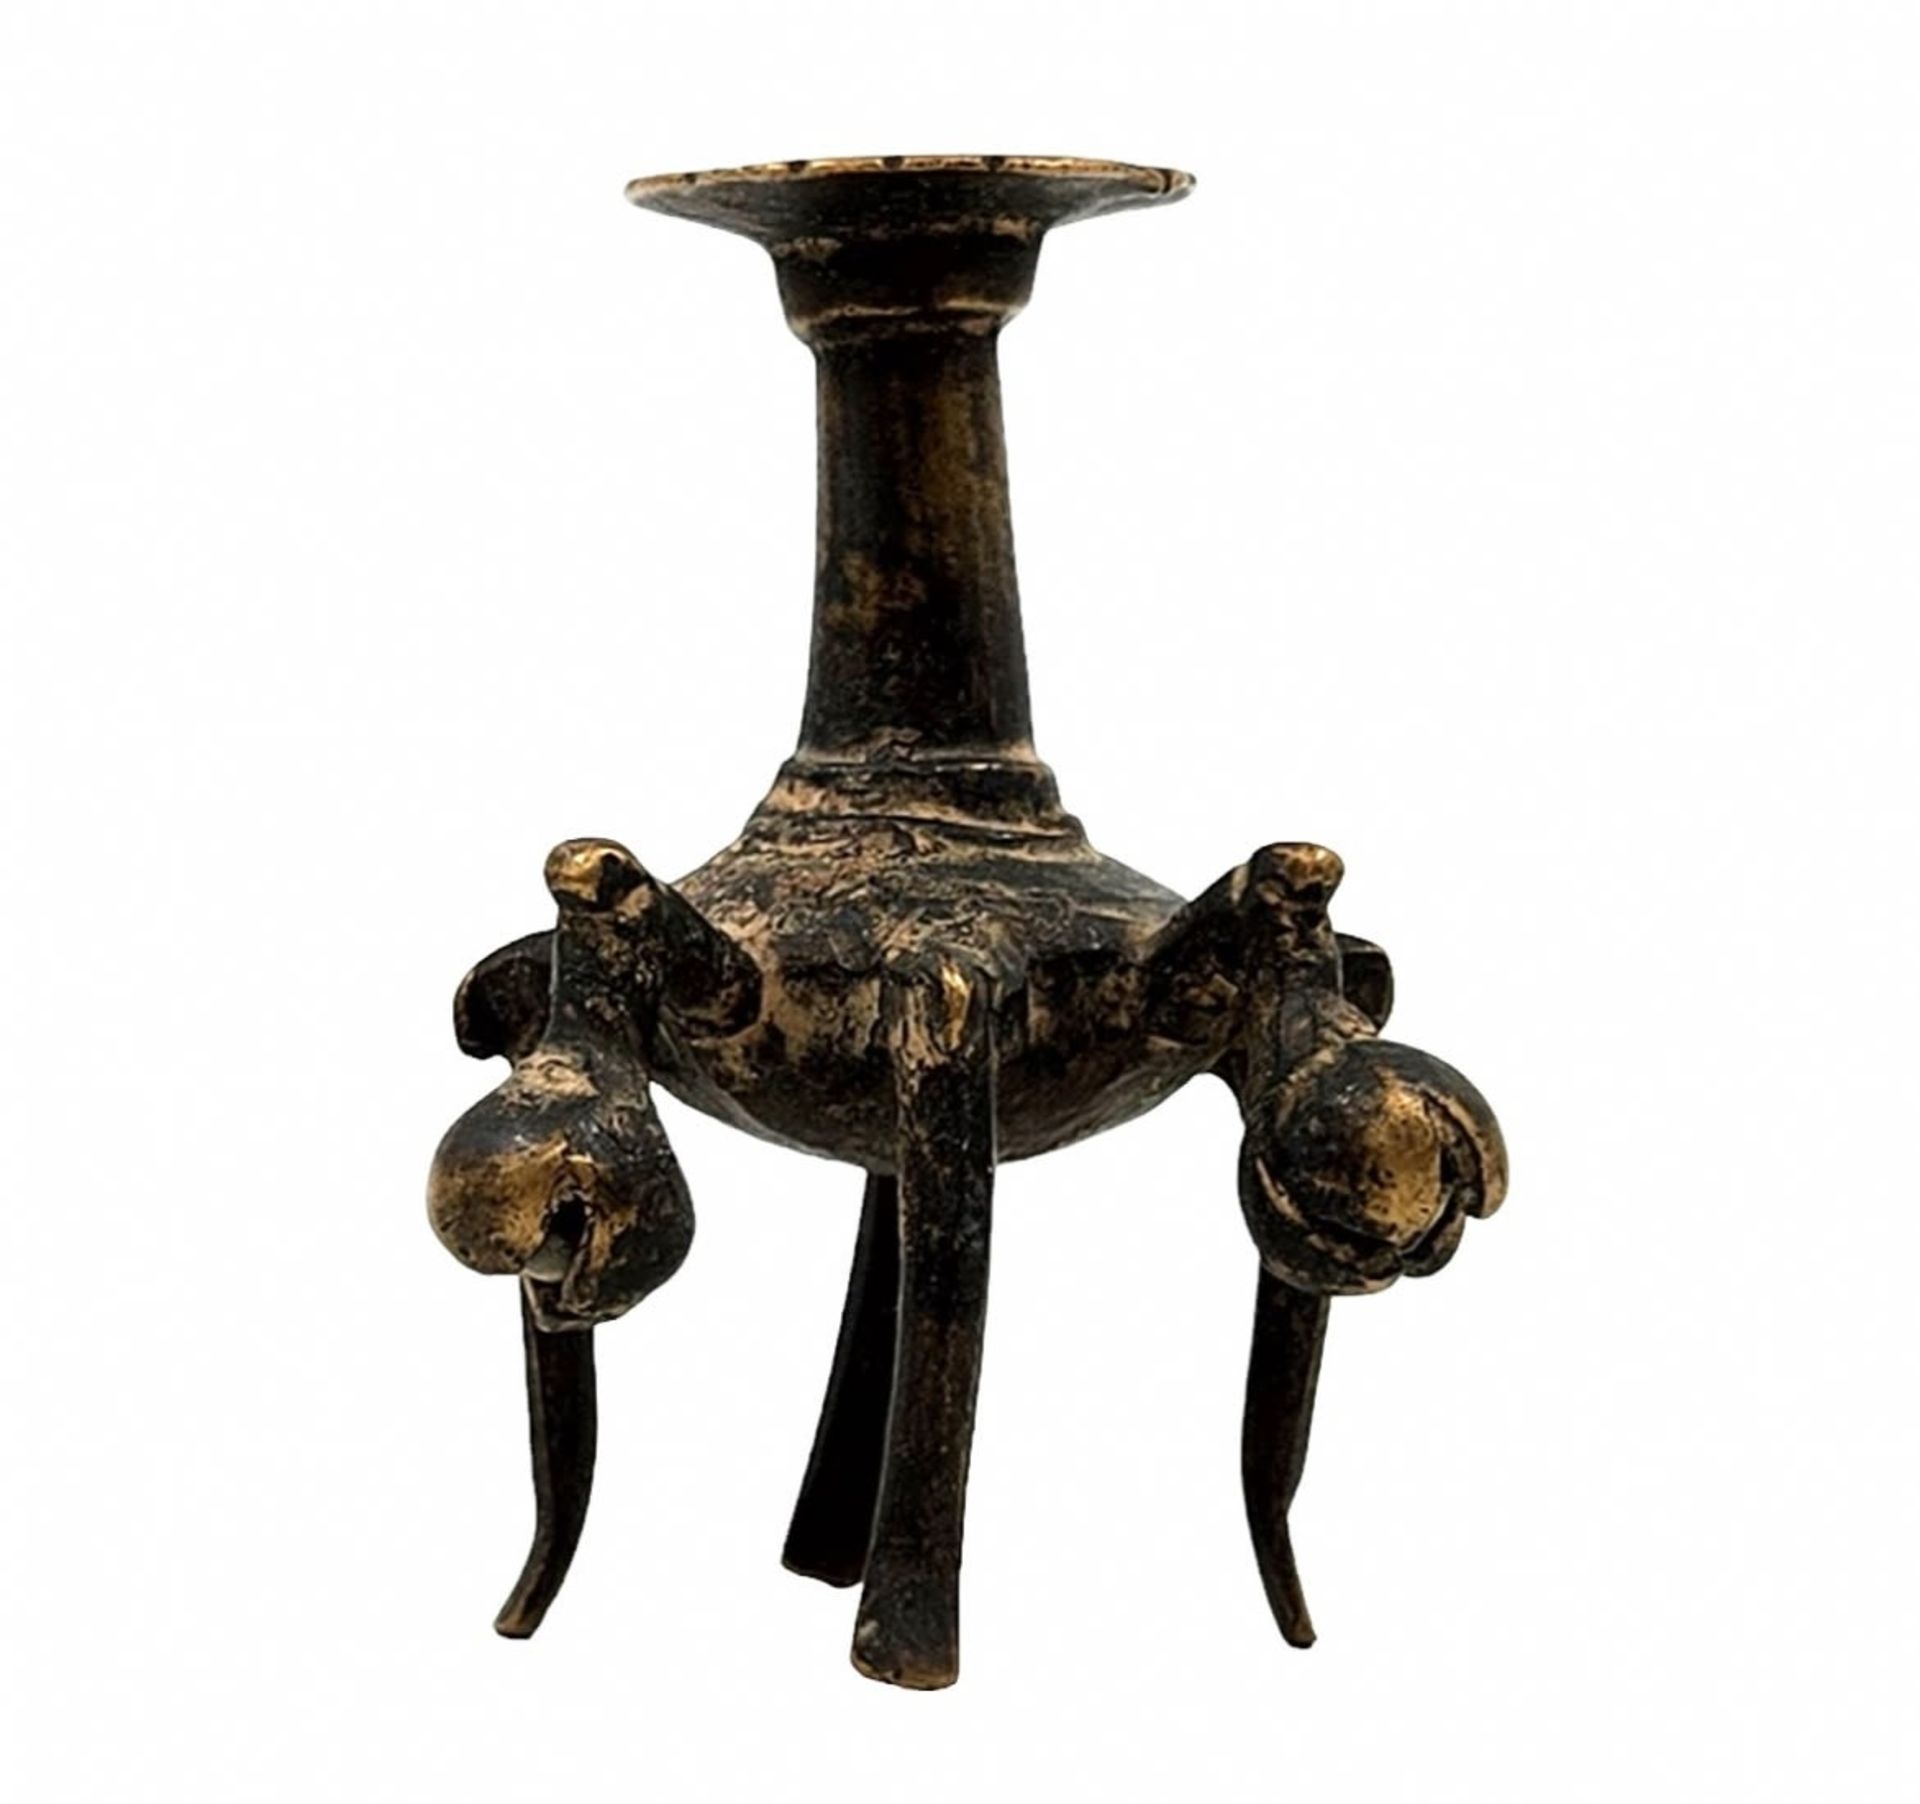 An antique Indian vessel for cosmetics, made of bronze, 18th century, some of the bells are